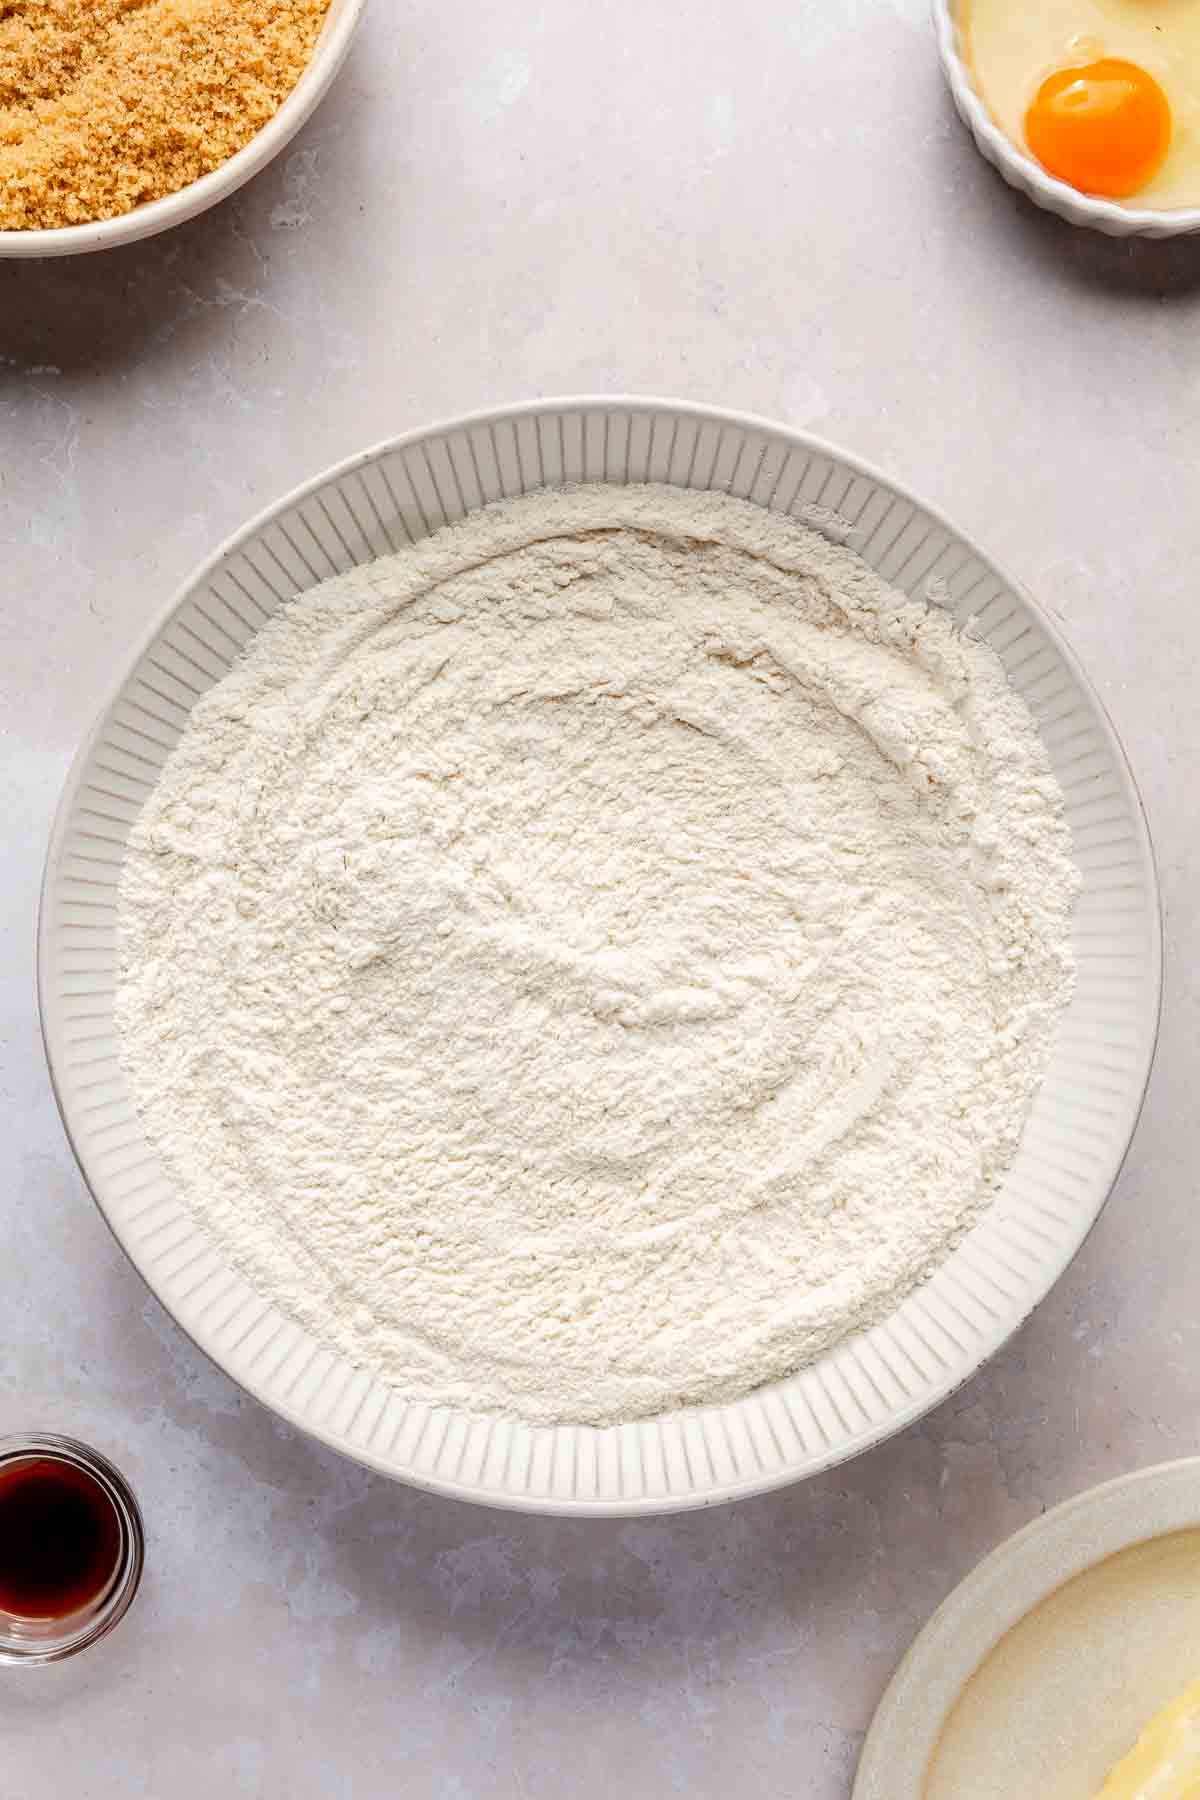 Flour mixture in a large bowl.